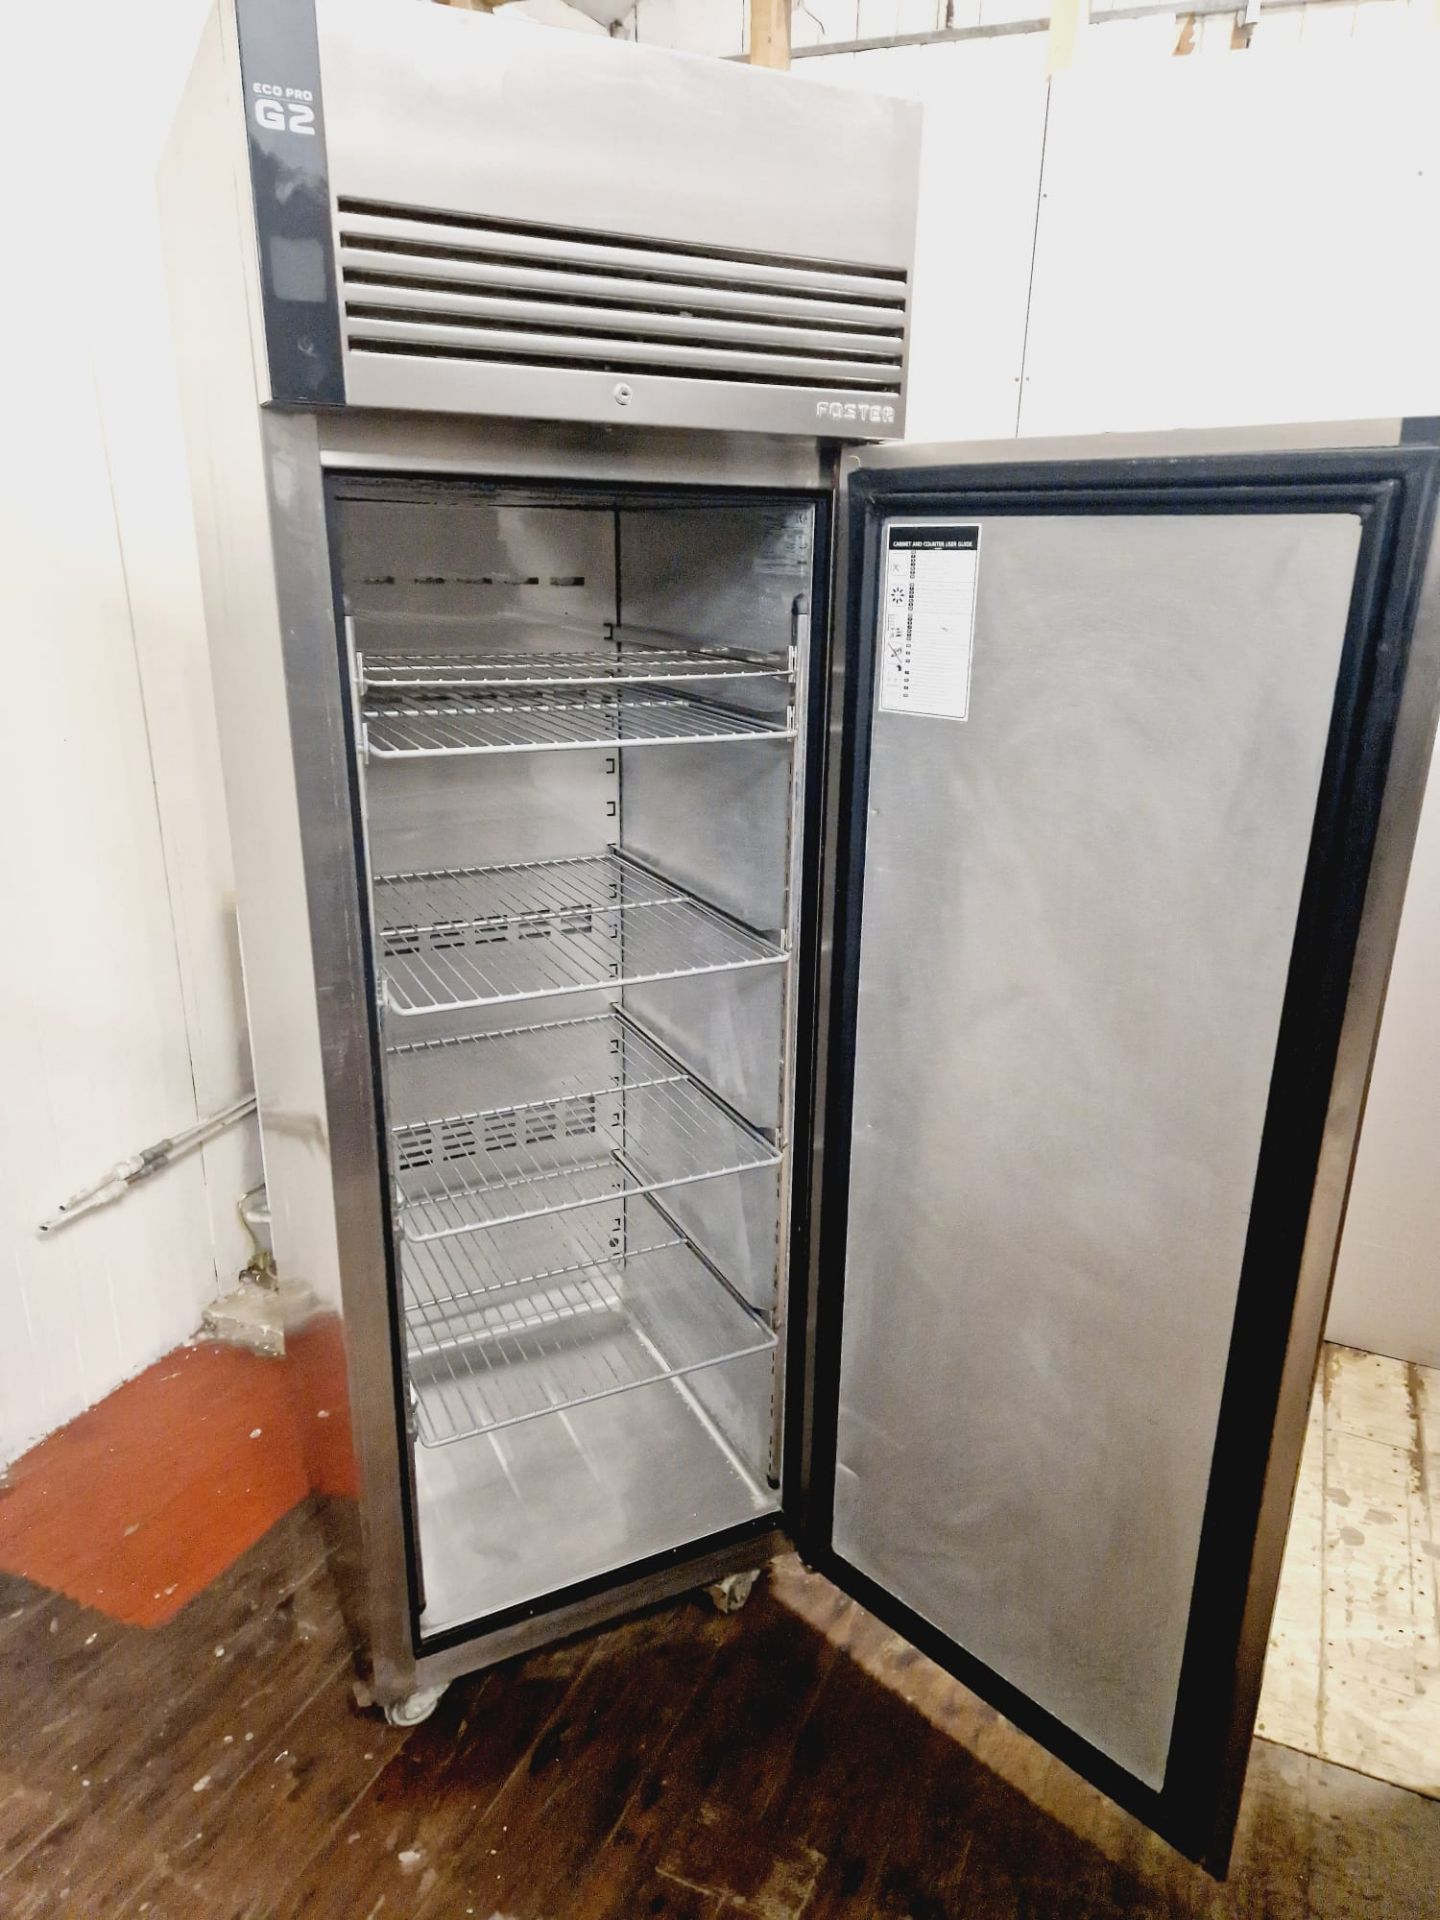 FOSTER G2 UPRIGHT FRIDGE FULLY WORKING  AND SERVICED - Bild 3 aus 4